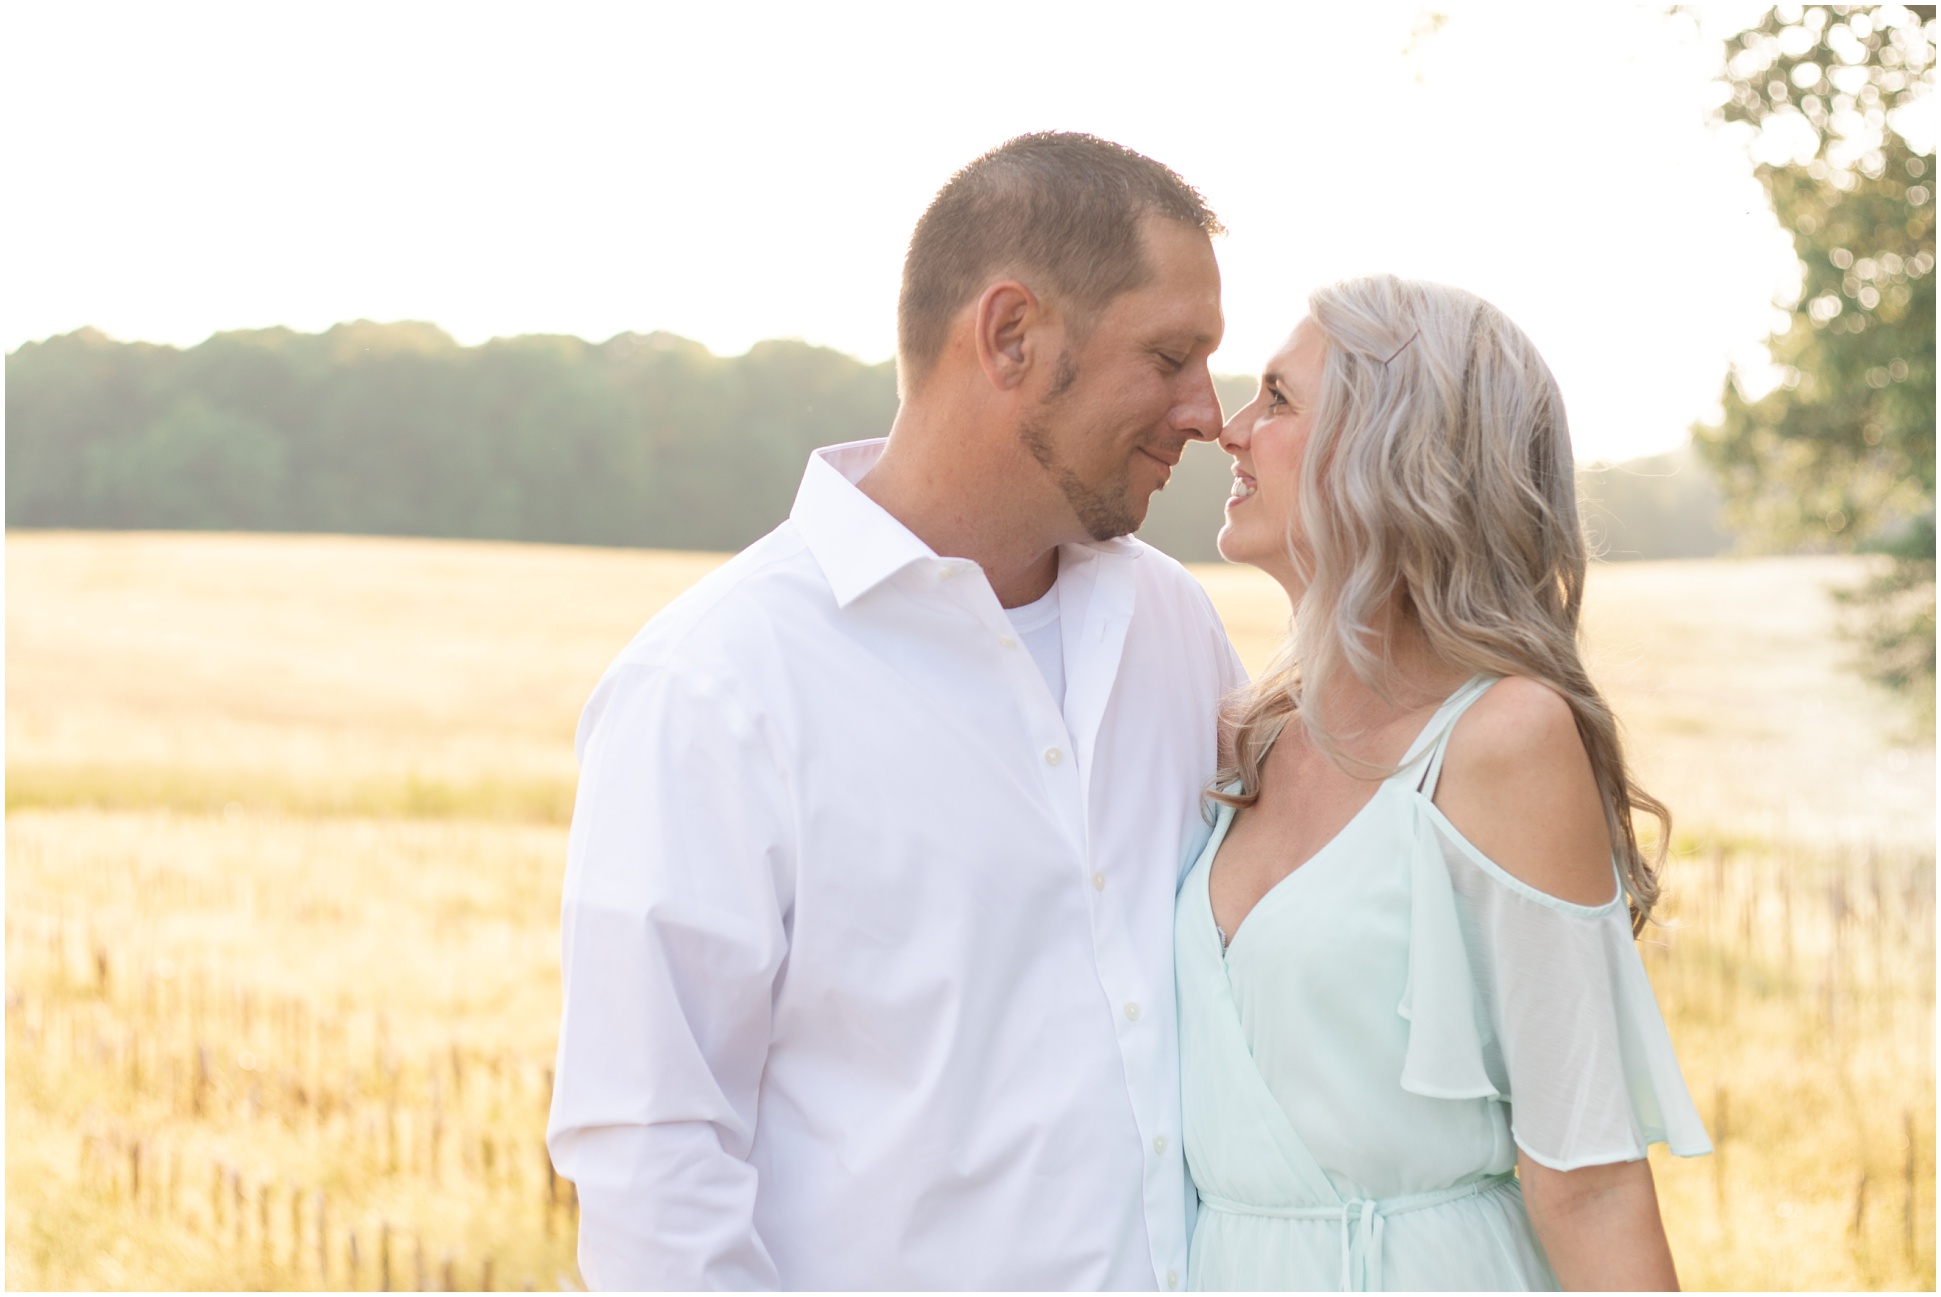 Husband and Wife touching noses in the field with golden light